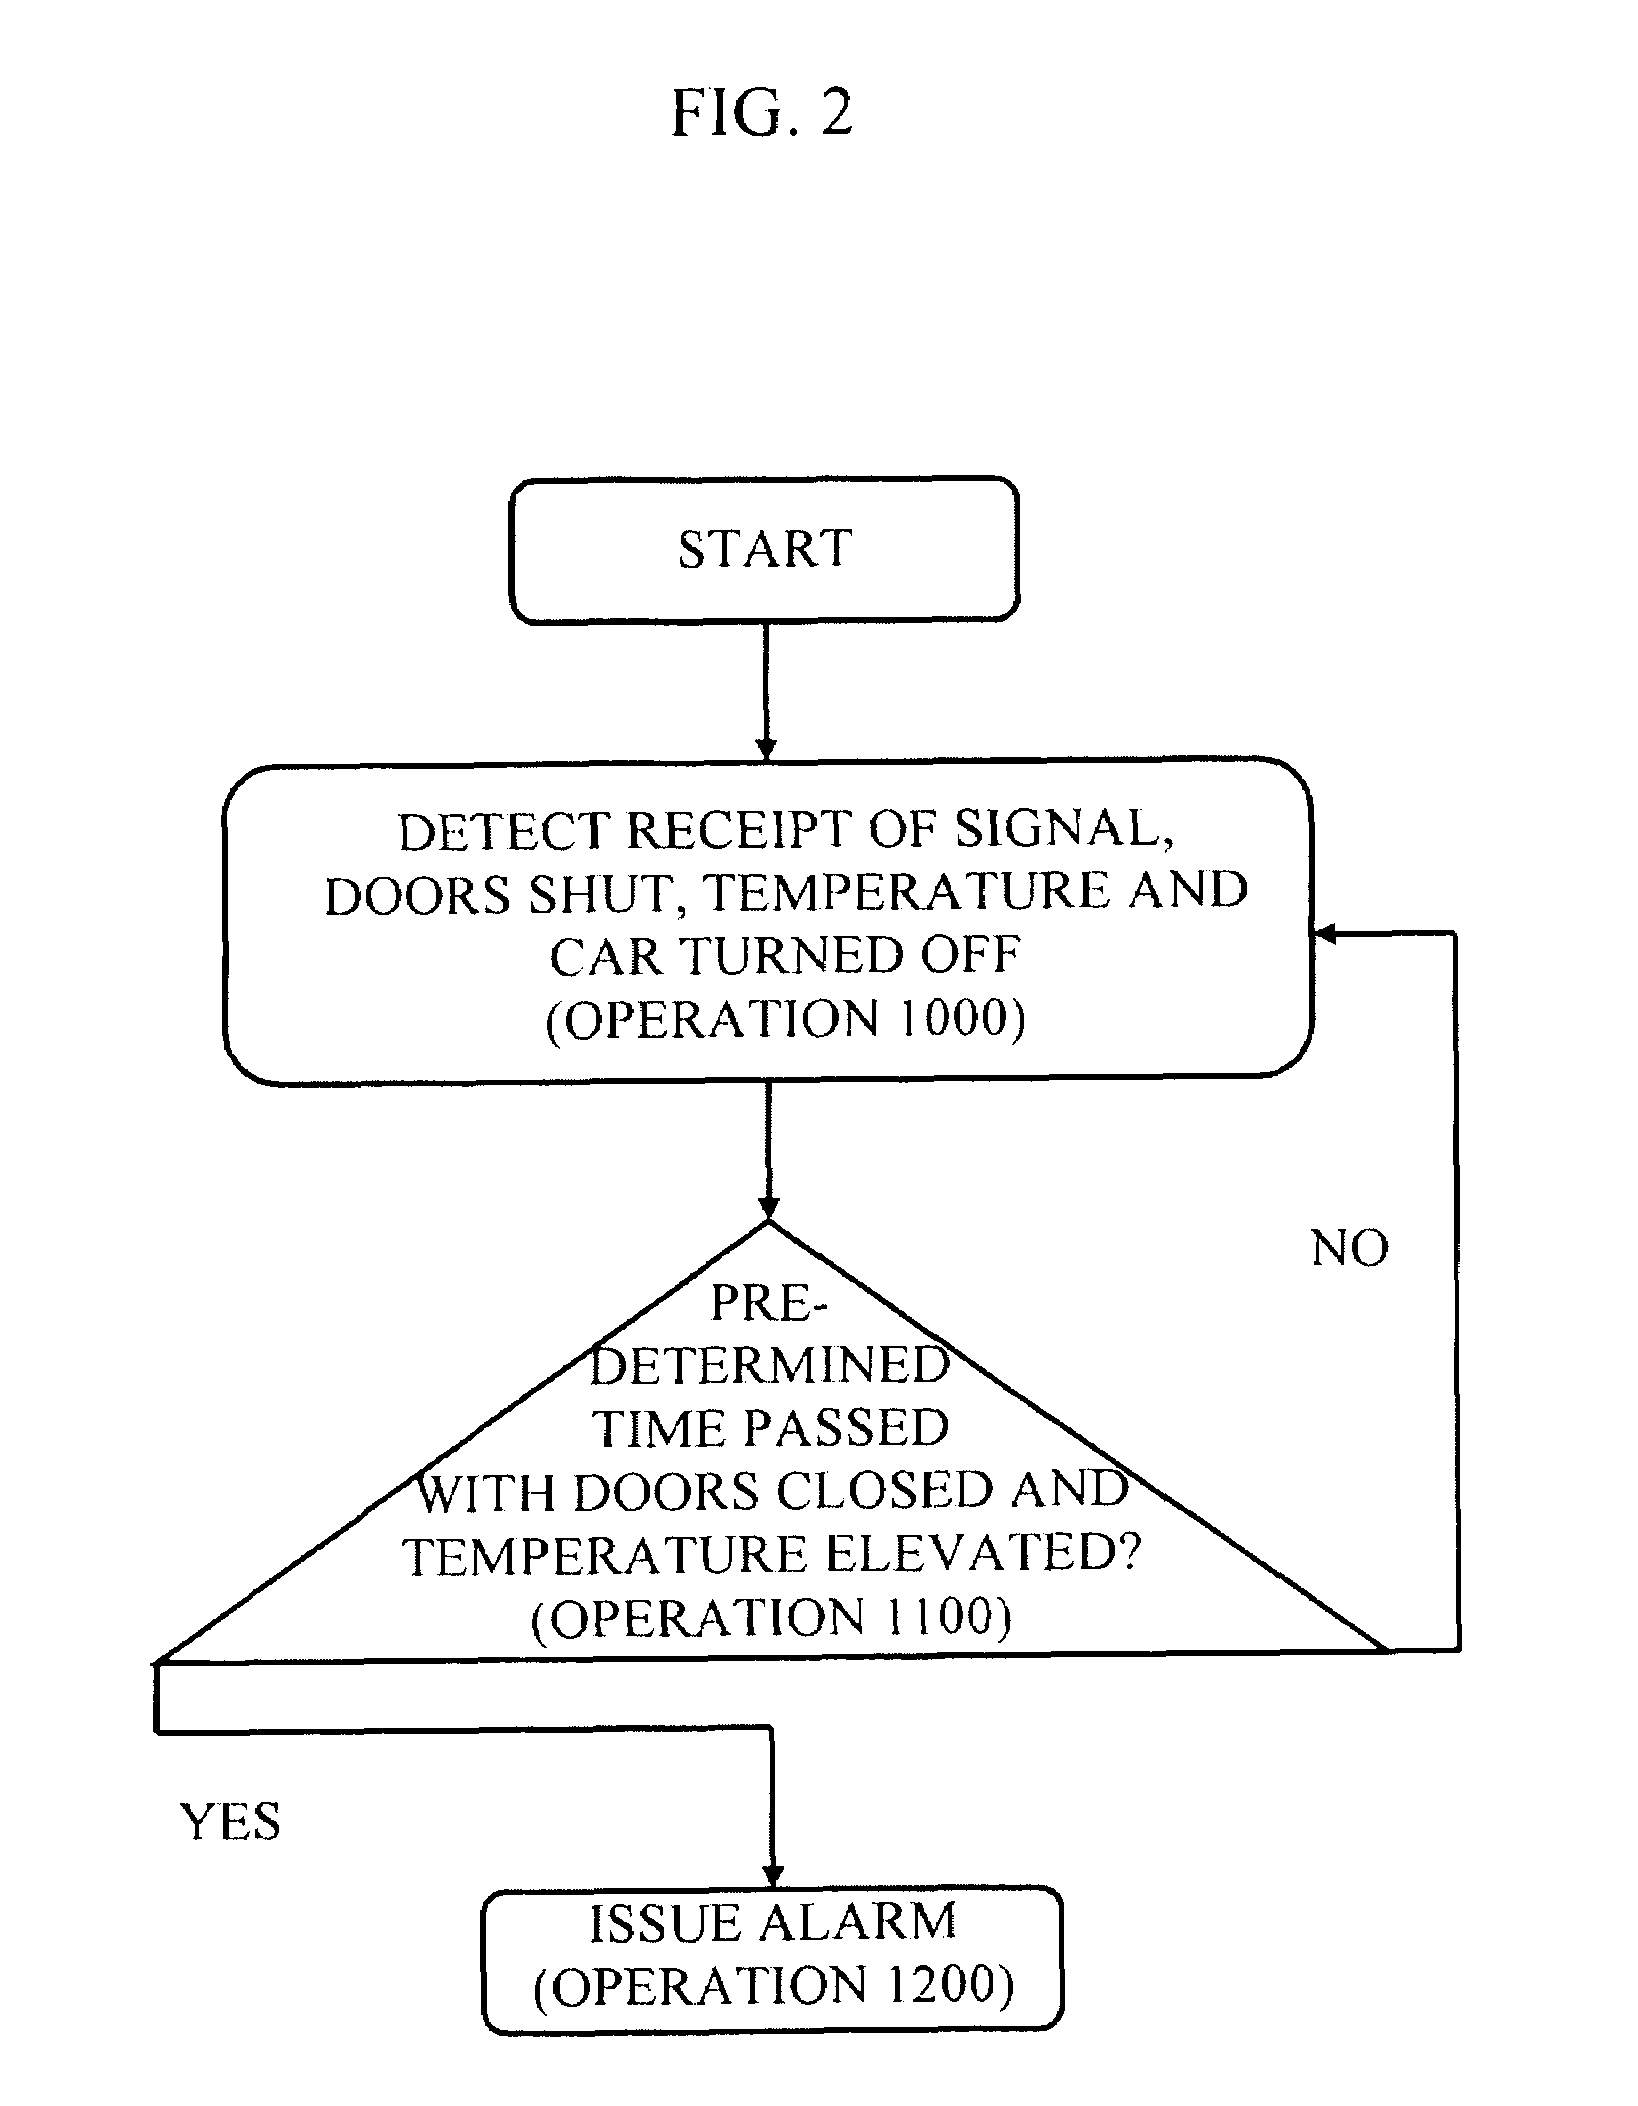 System for determining abandonment of child in unattended vehicle